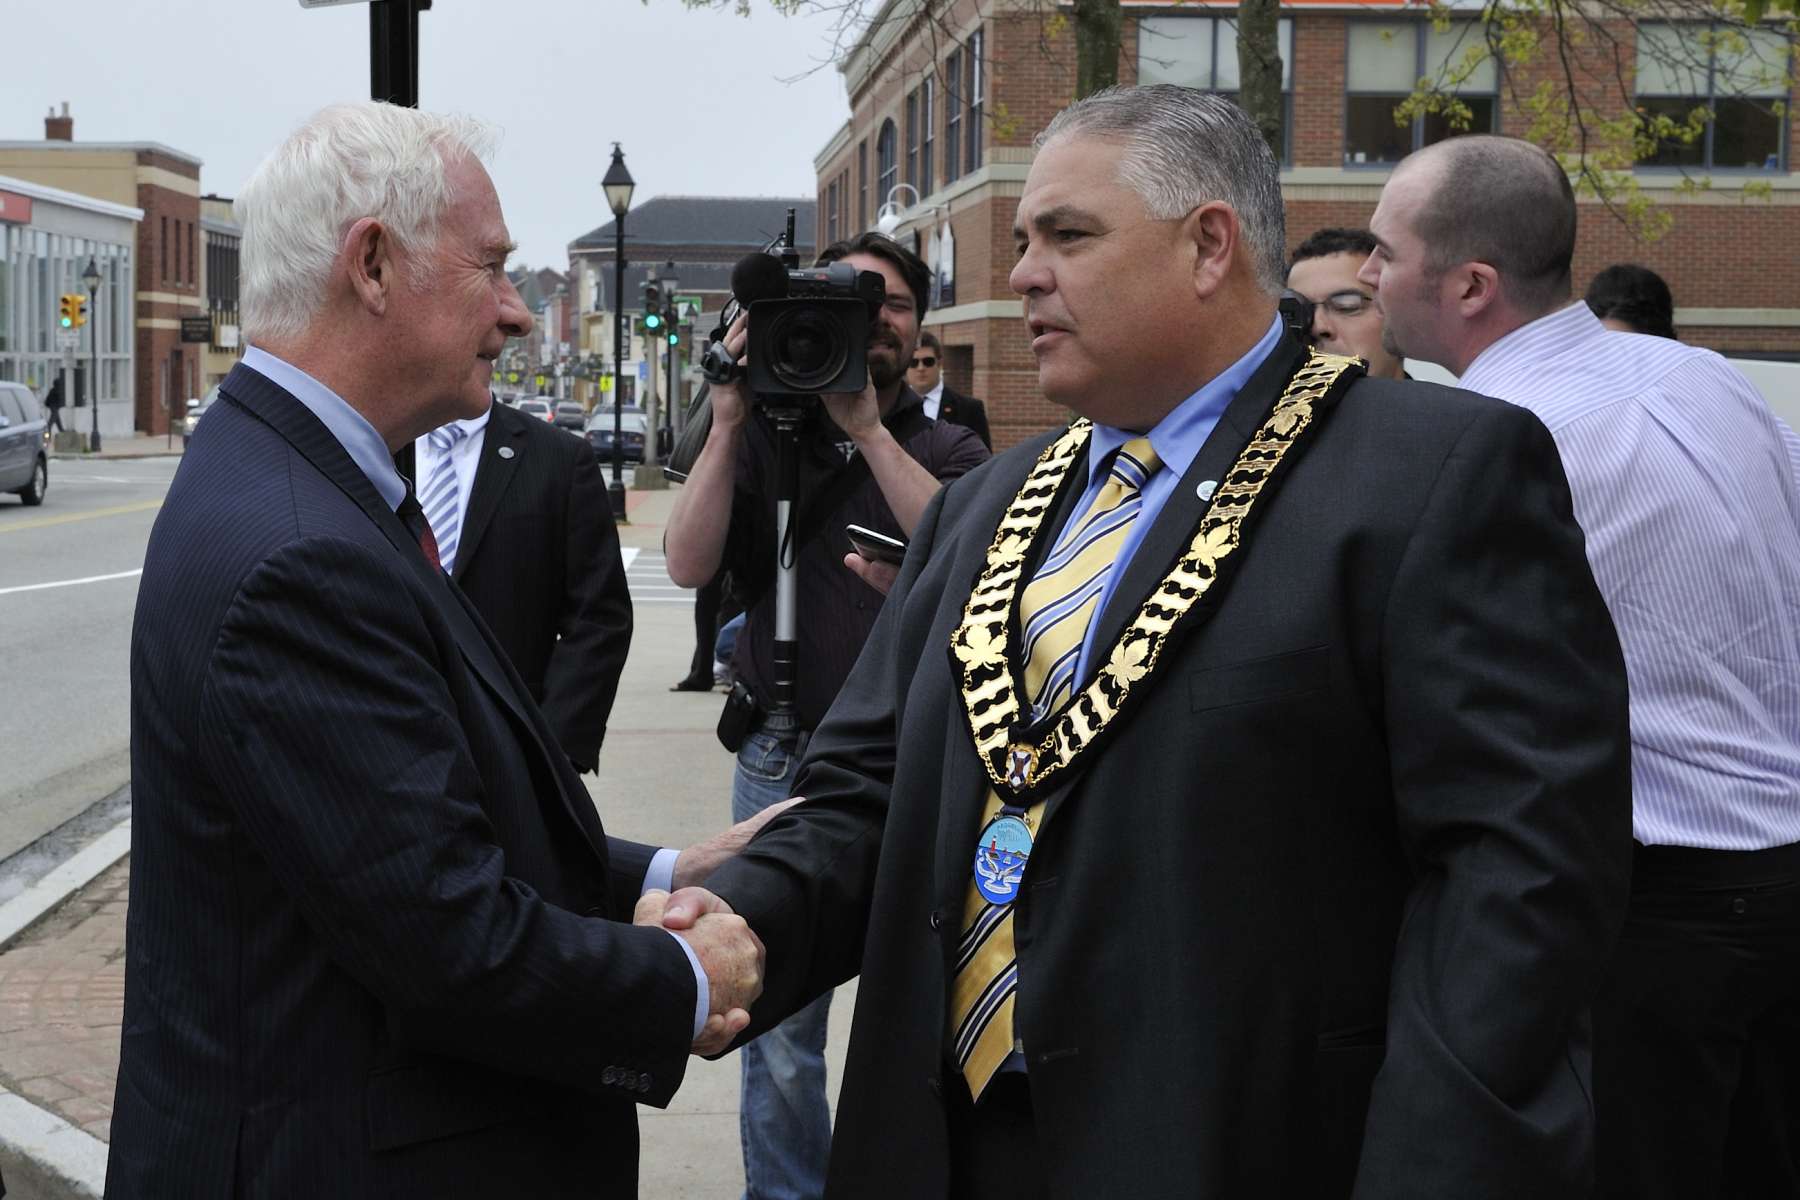 In the afternoon, His Excellency went to Yarmouth to meet with city mayor His Worship Phil Mooney. 